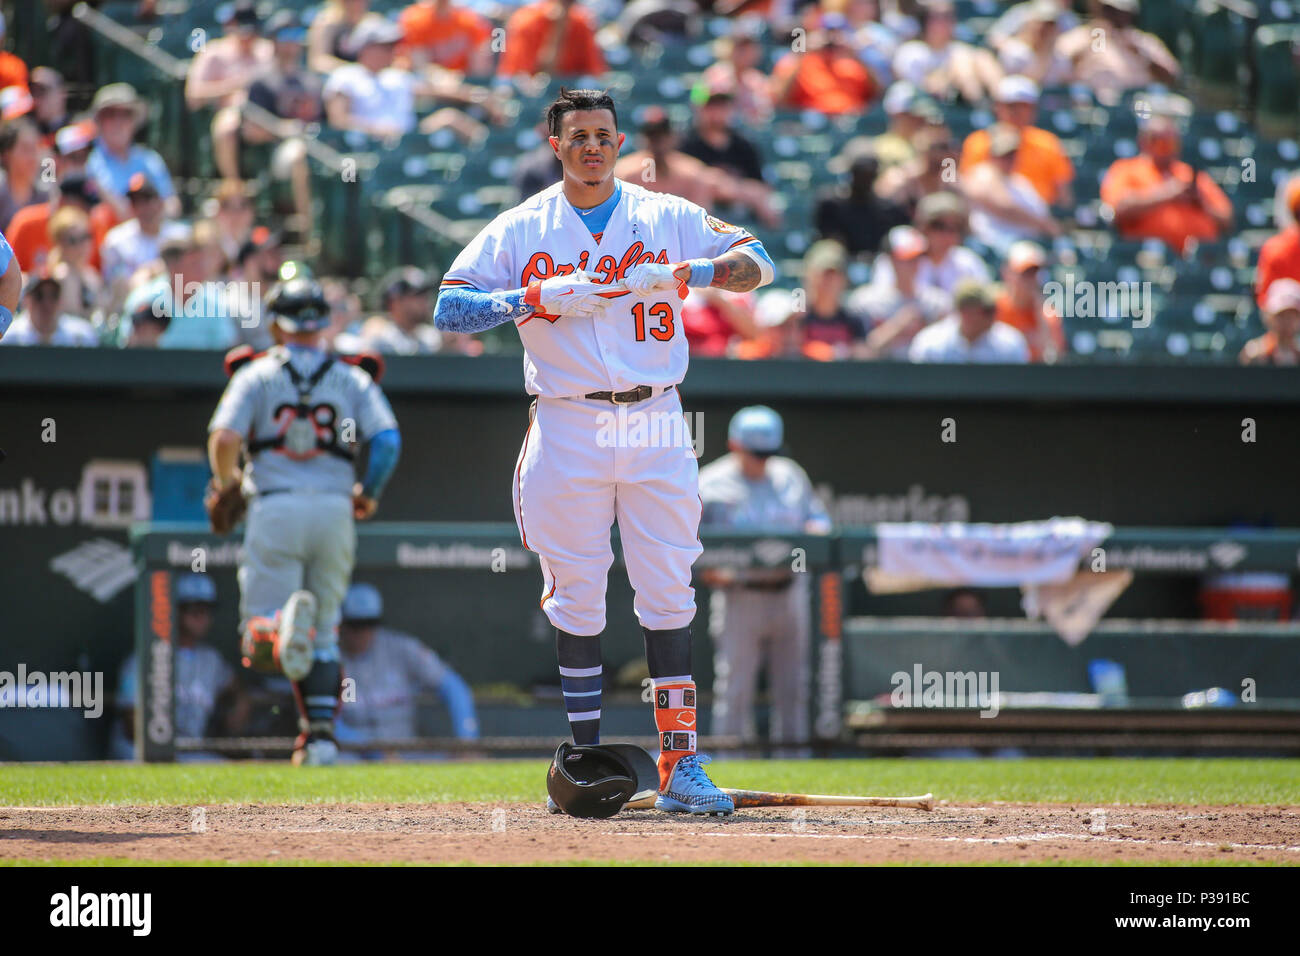 Mlb. 3rd June, 2017. Baltimore Orioles third baseman Manny Machado (13)  during the Boston Red Sox vs Baltimore Orioles game at Orioles Park in  Camden Yards in Baltimore, MD. Boston beat Baltimore